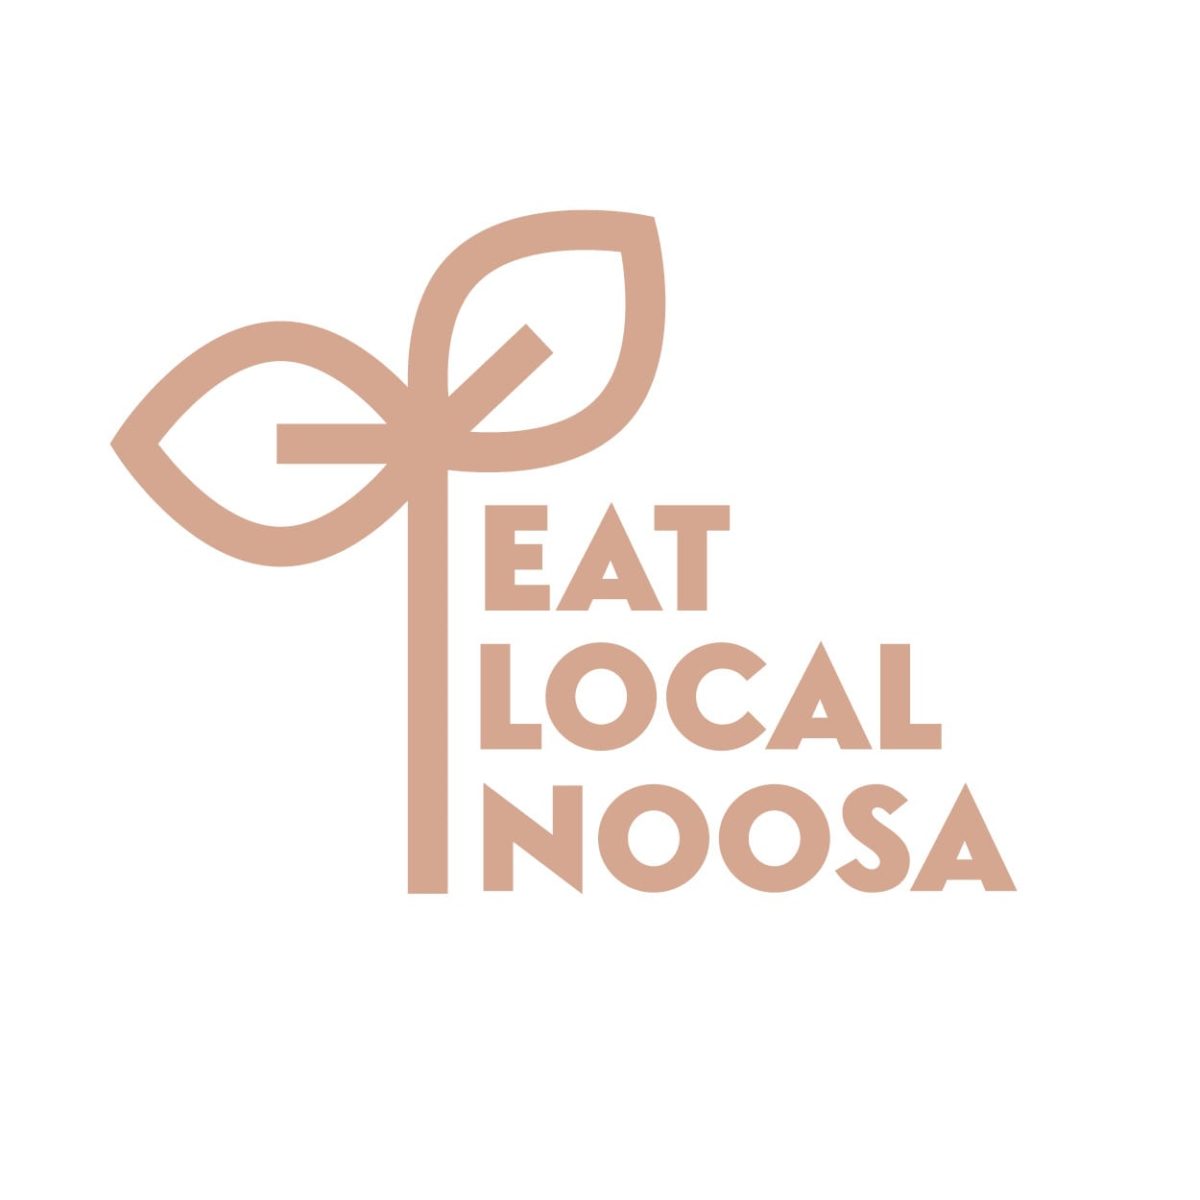 Eat Local Noosa Different Colours Social Posts 600x600